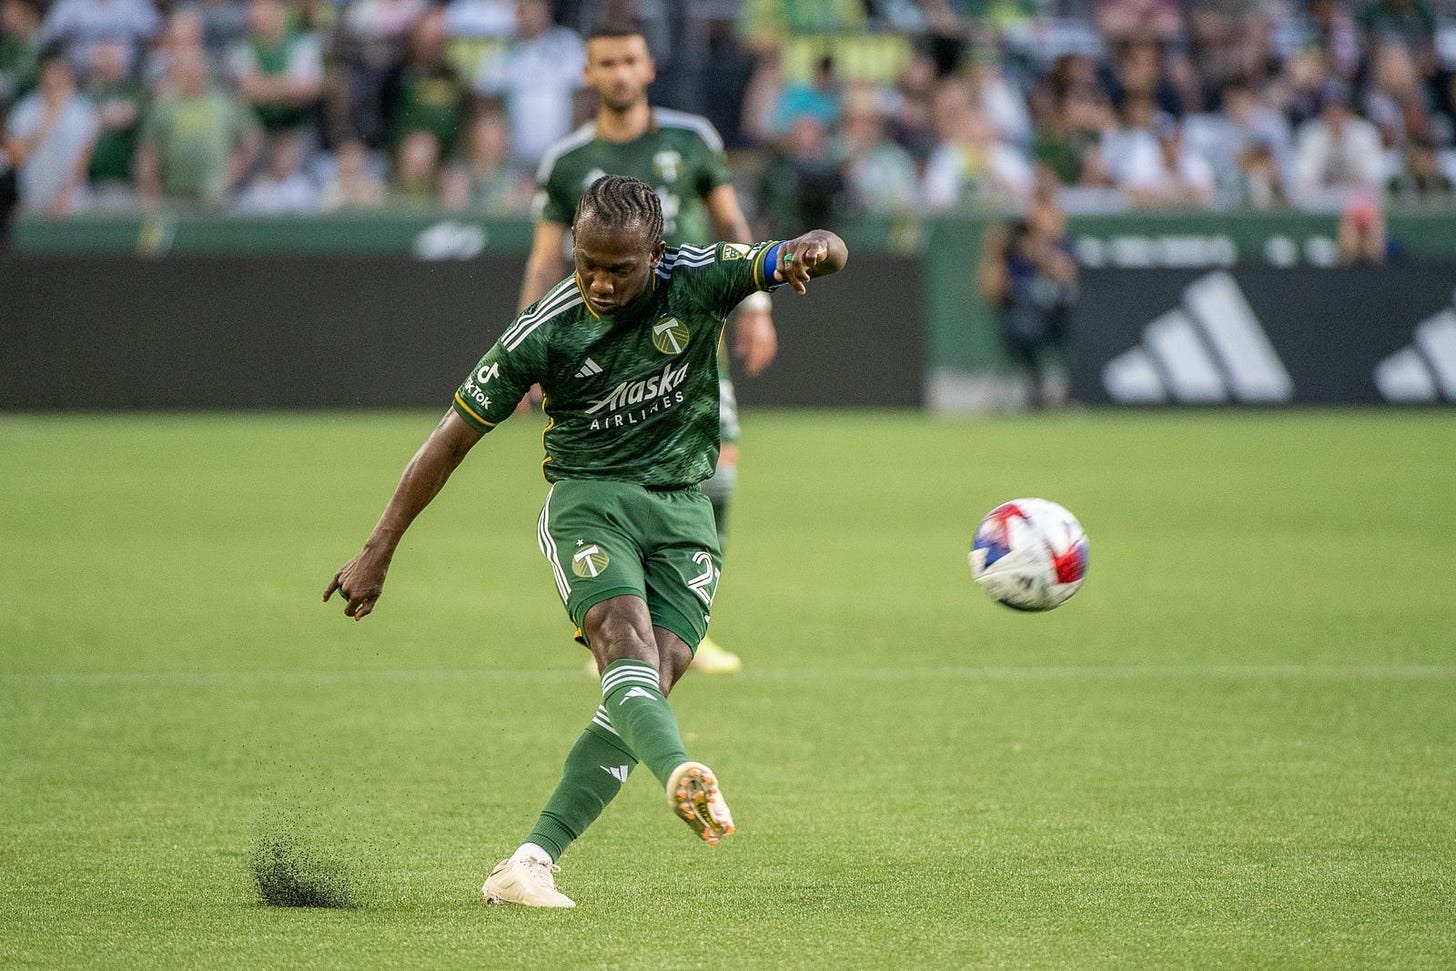 MLS Matchday 19 features Portland Timbers midfielder Diego Chara